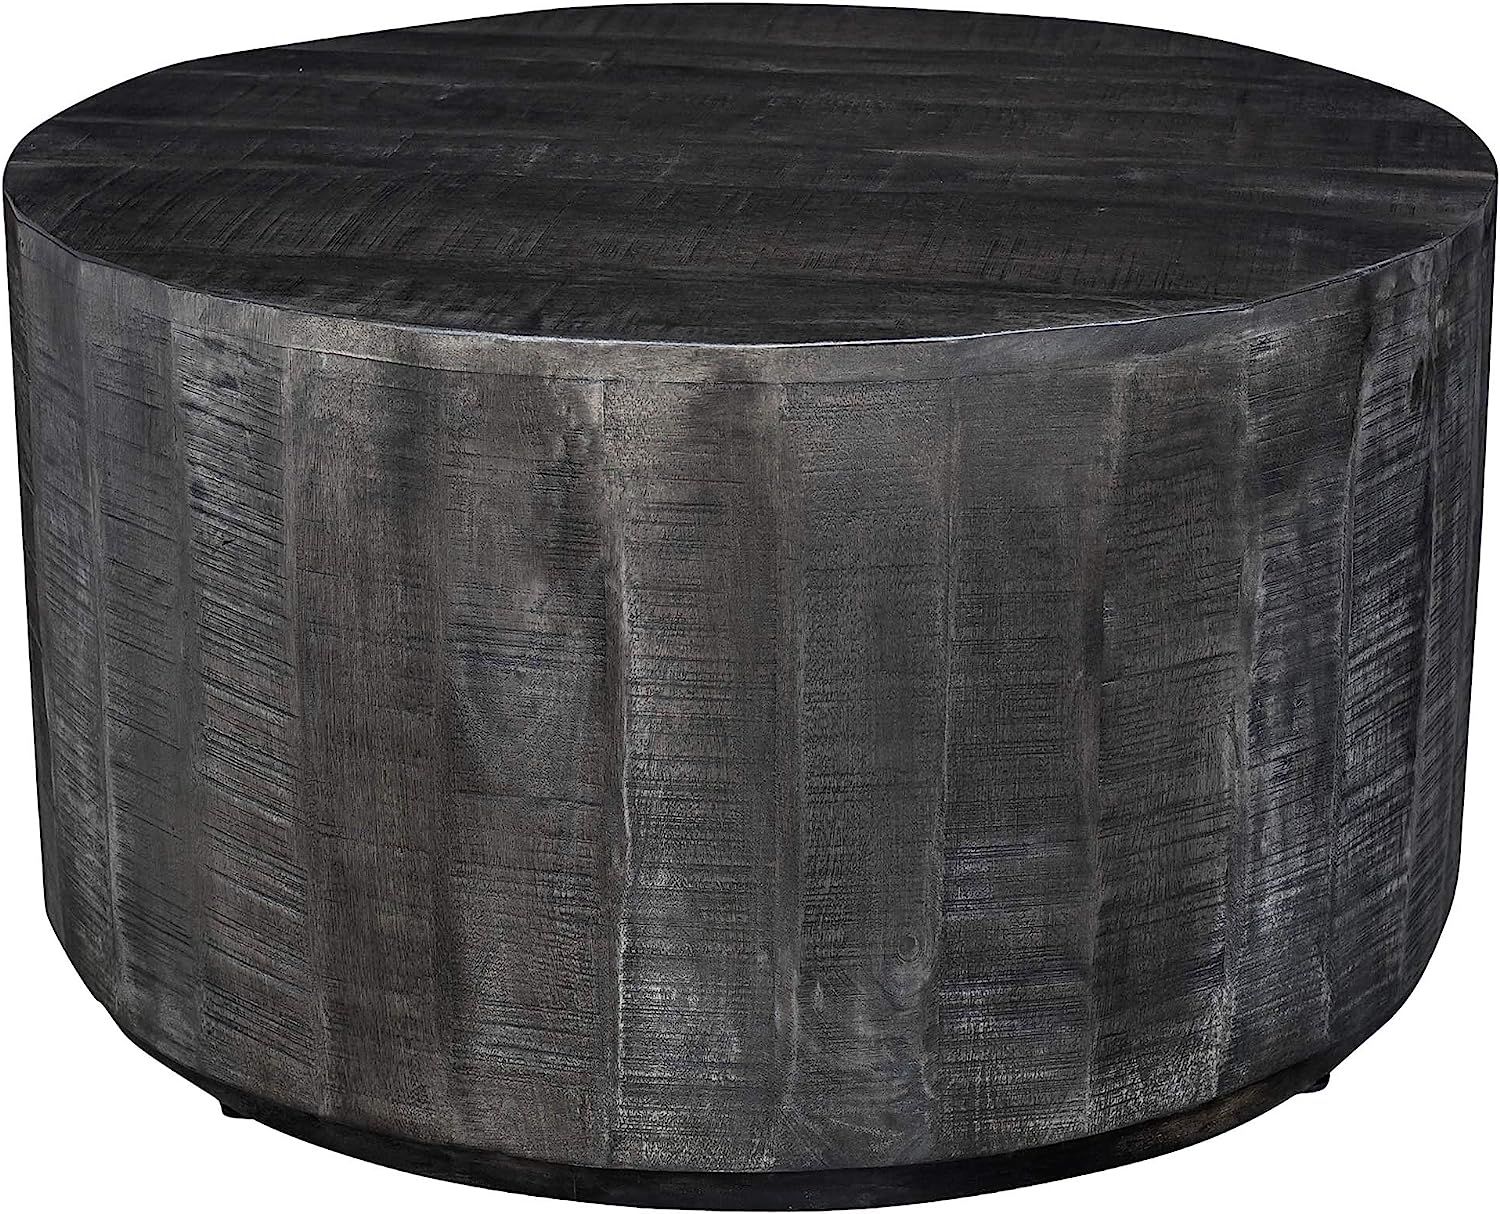 Rustic Modern Solid Wood Coffee Table in Distressed Grey | Amazon (US)